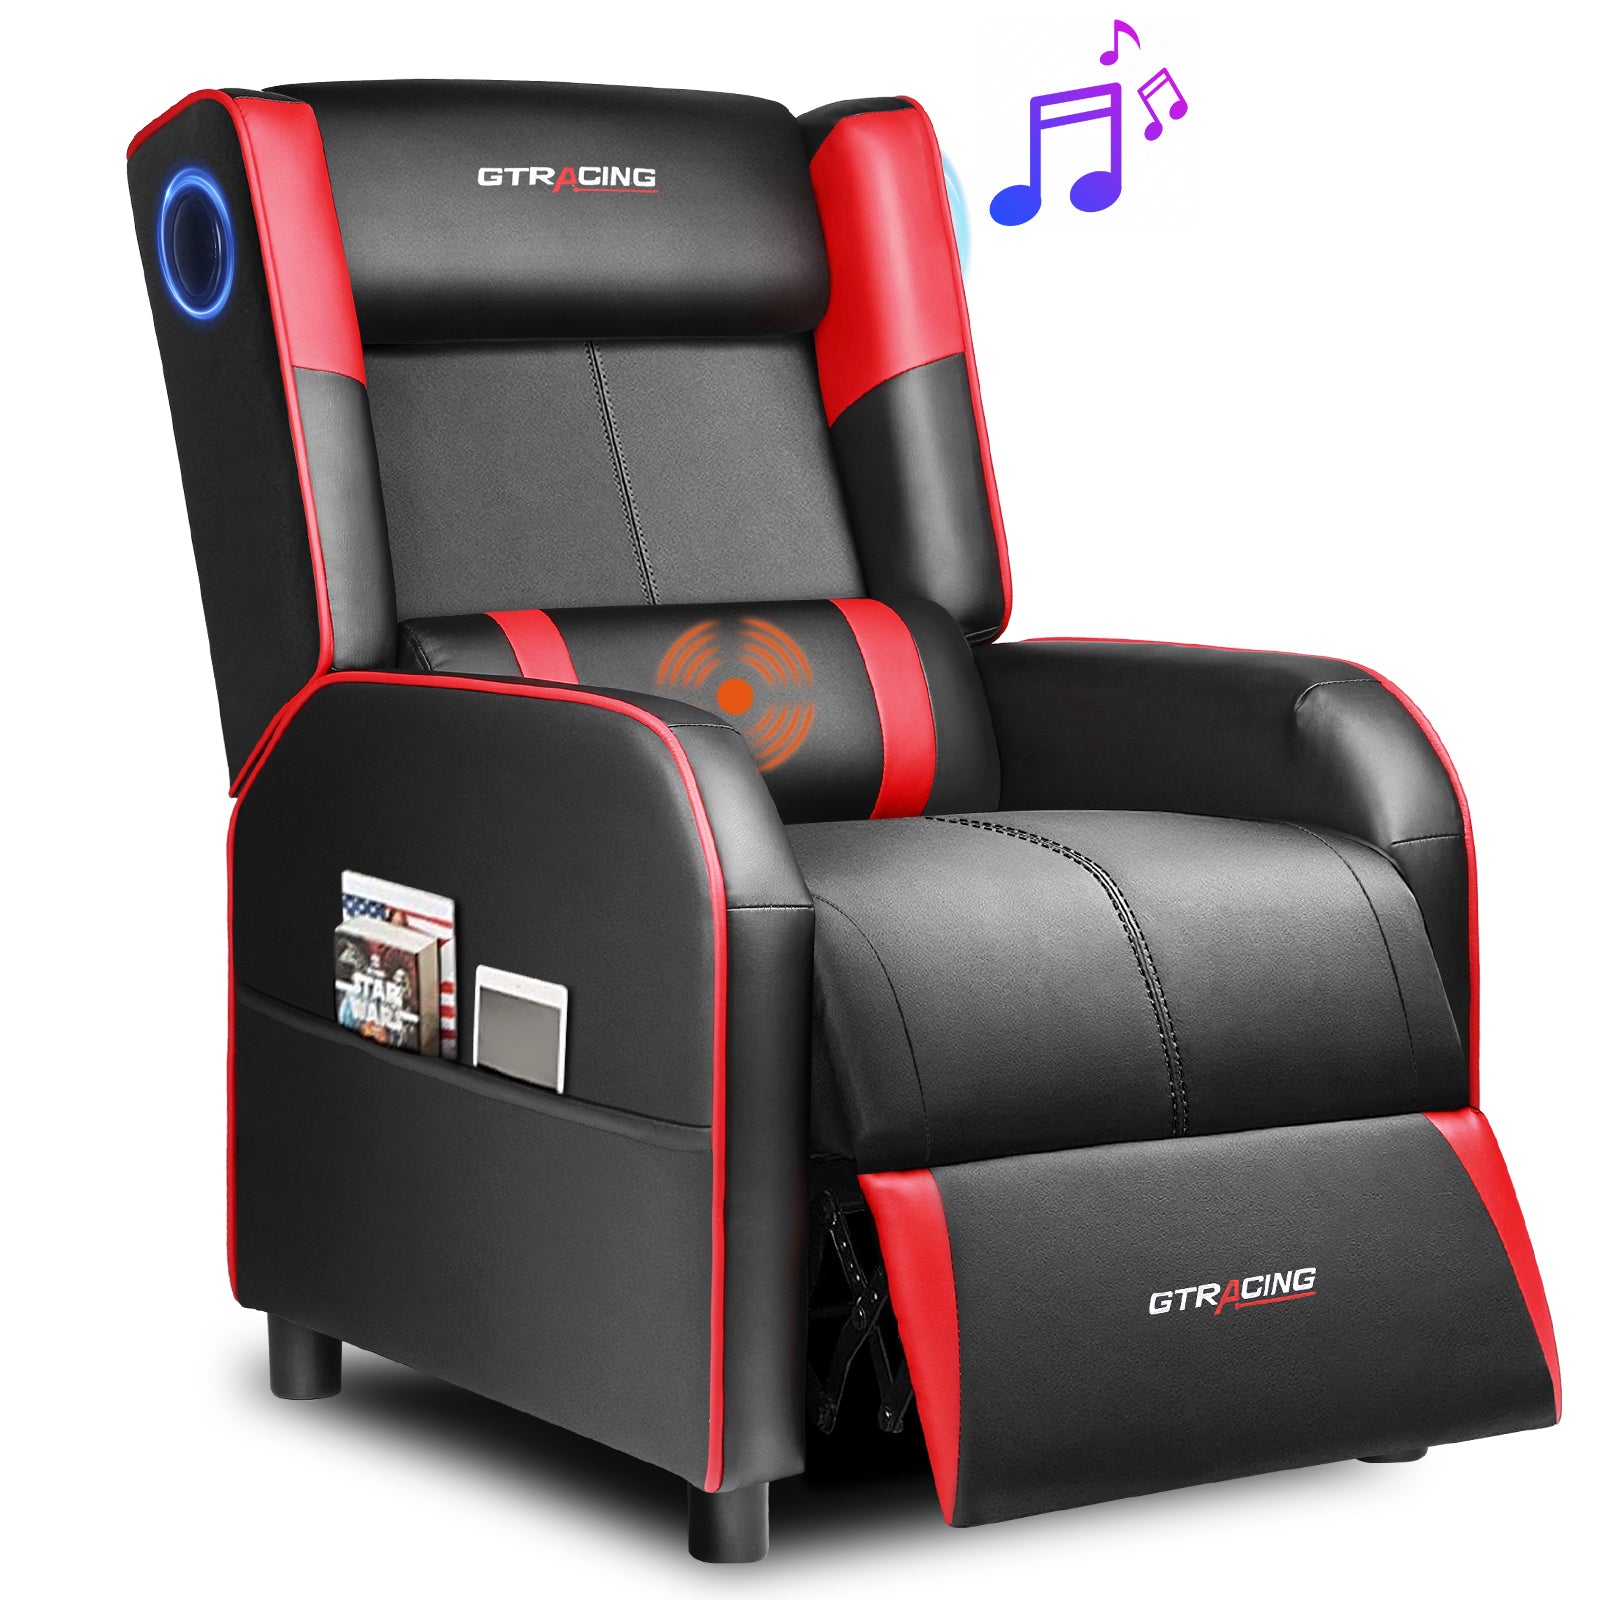 Homall Fabric Recliner Chair Ergonomic Adjustable Home Theater Seat Modern  Single Recliner Sofa with Thick Seat Cushion for Living Room (Red) 